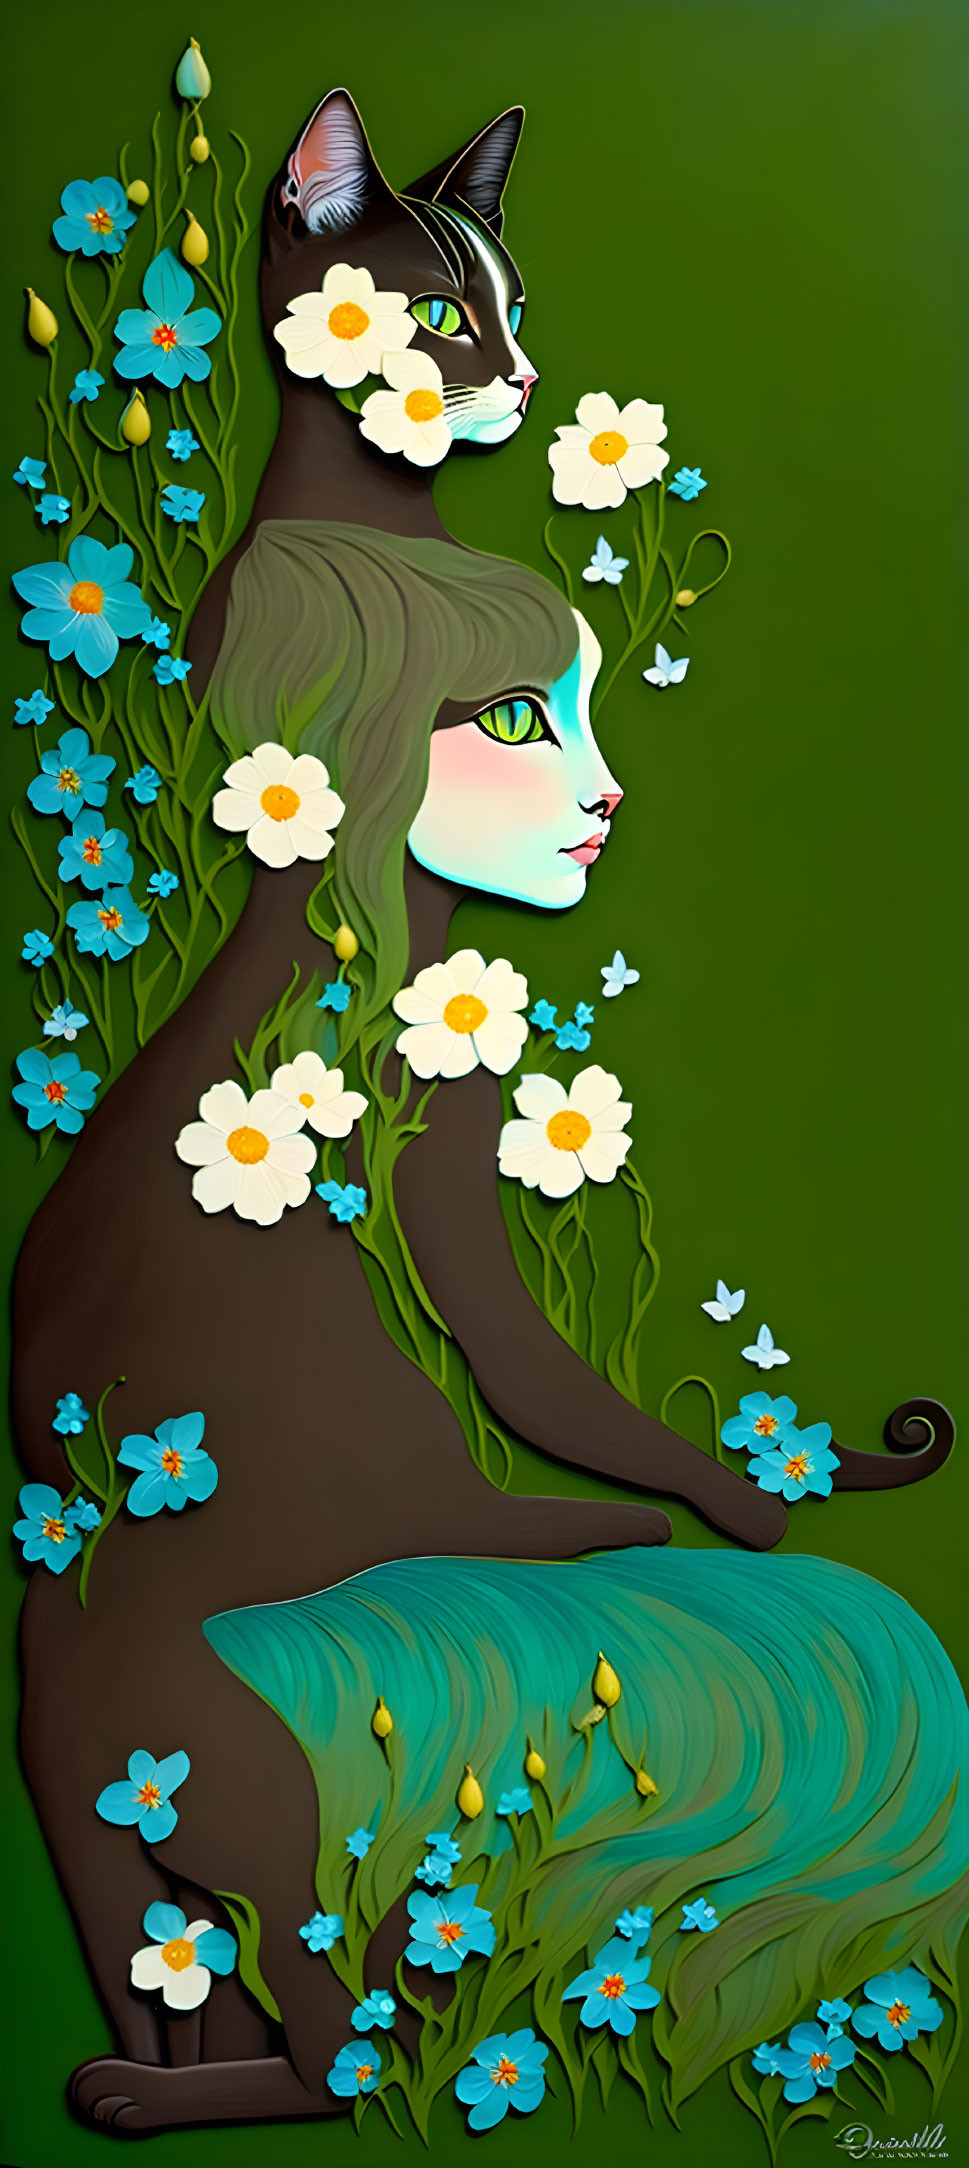 Stylized woman with floral and cat elements on green background